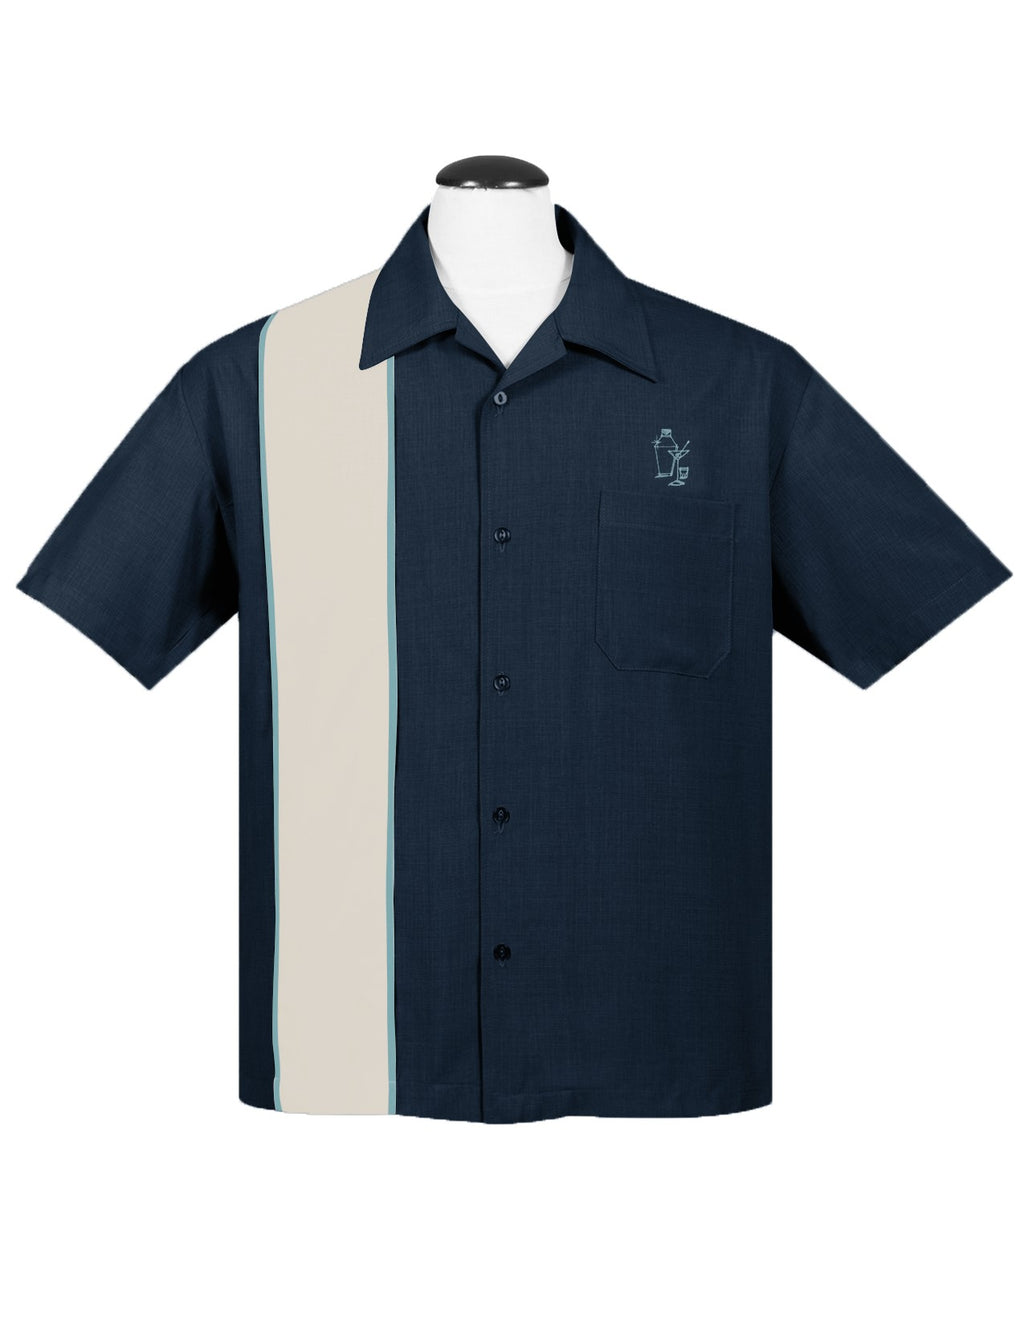 Shop Navy Blue Embroidered Bowling Shirt | Steady Clothing